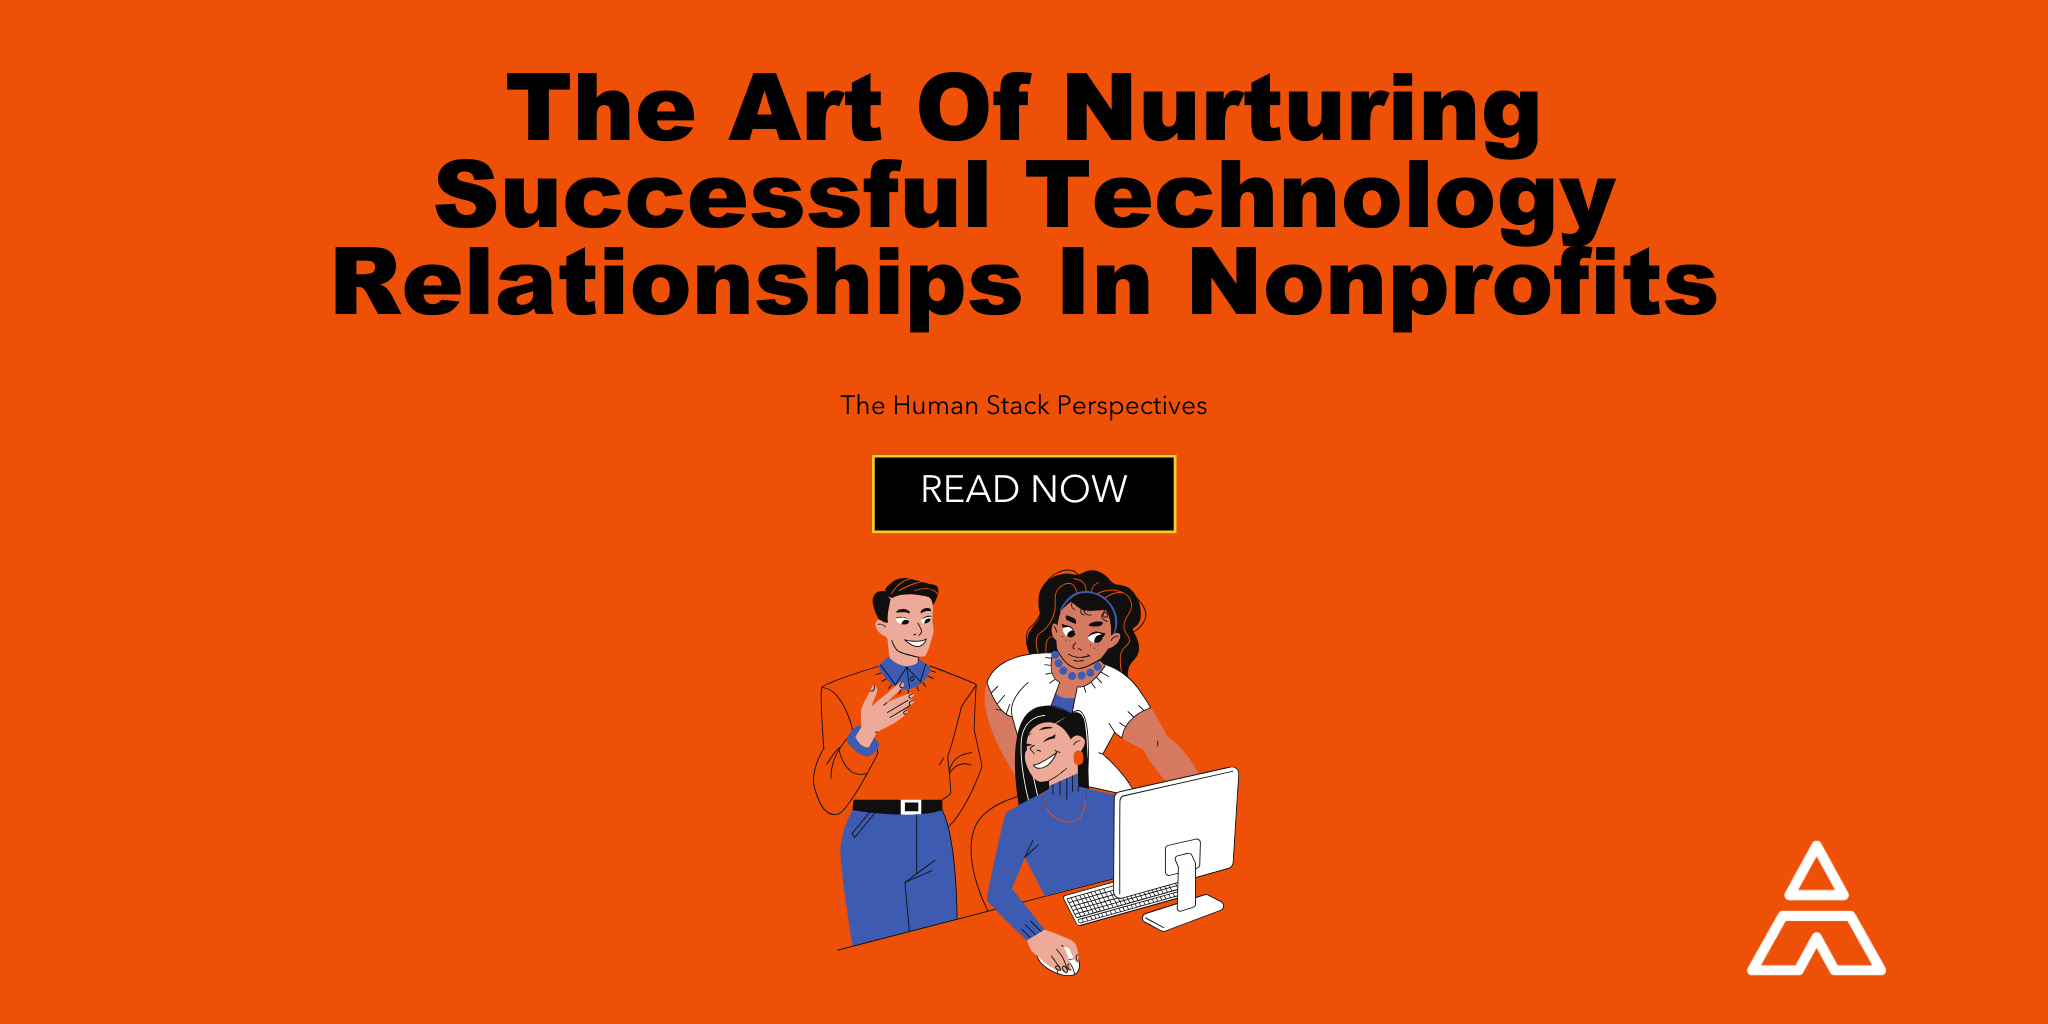 The Art Of Nurturing Successful Technology Relationships In Nonprofits